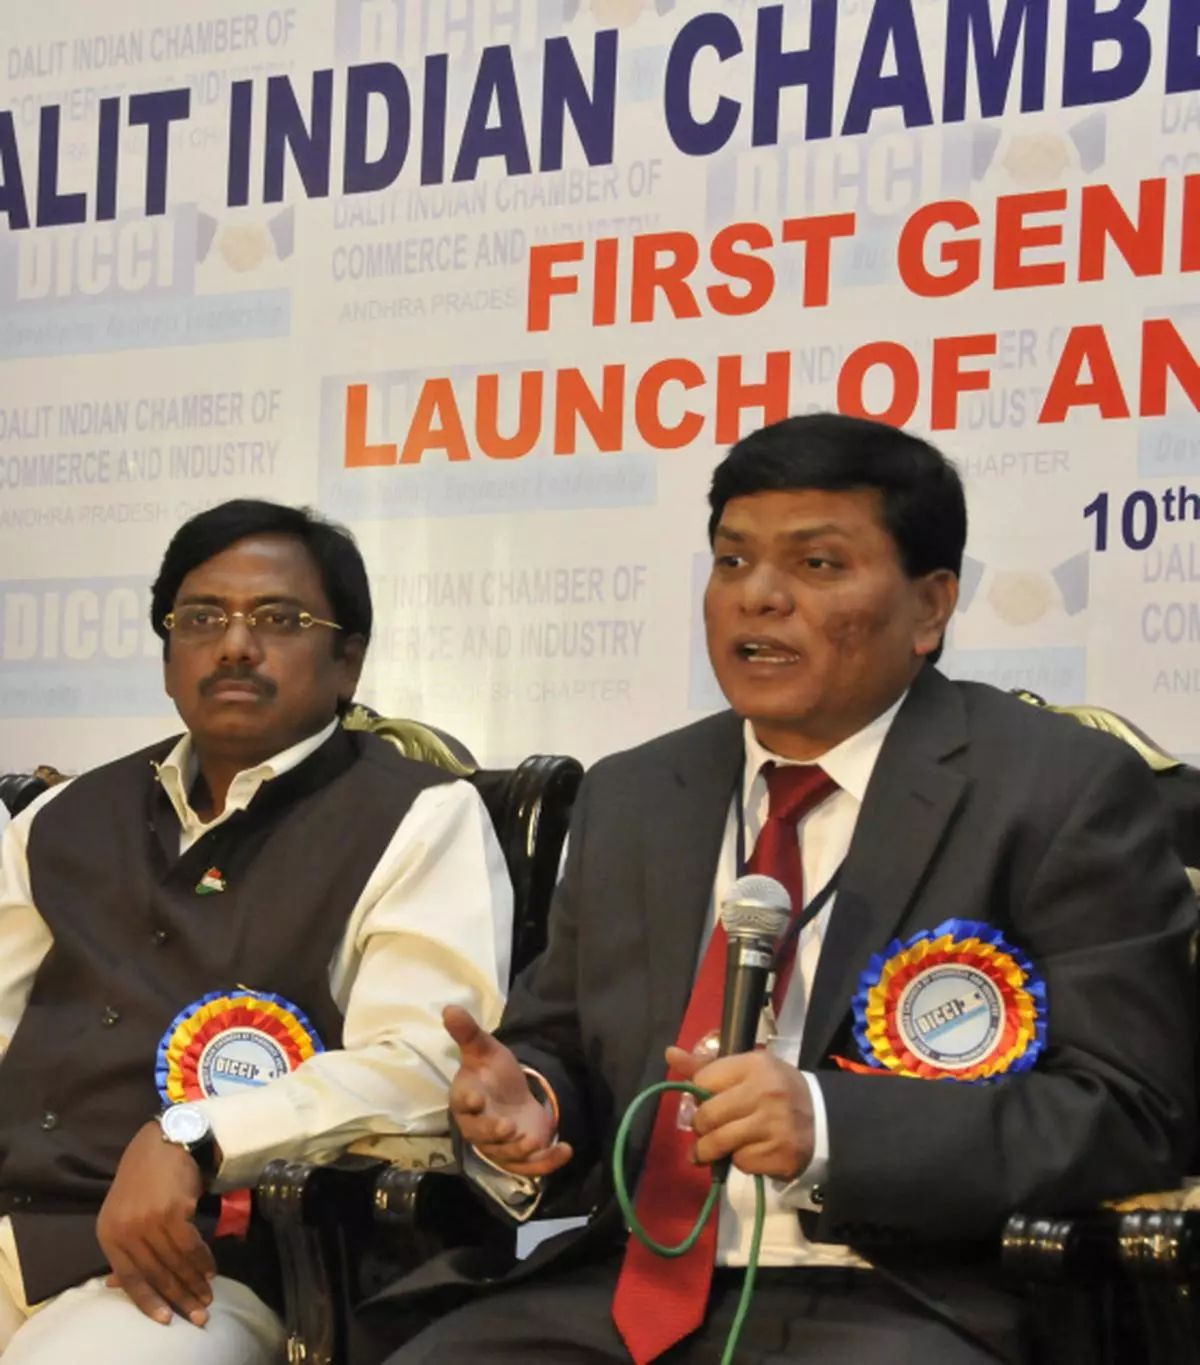 Mr Milind Kamble, founder-Chairman of the Dalit Indian Chamber of Commerce and Industry, at the launch of the Hyderabad Chapter in the city on Tuesday. At left is Mr G. Vivekanand, MP. - Photo: P. V. Sivakumar